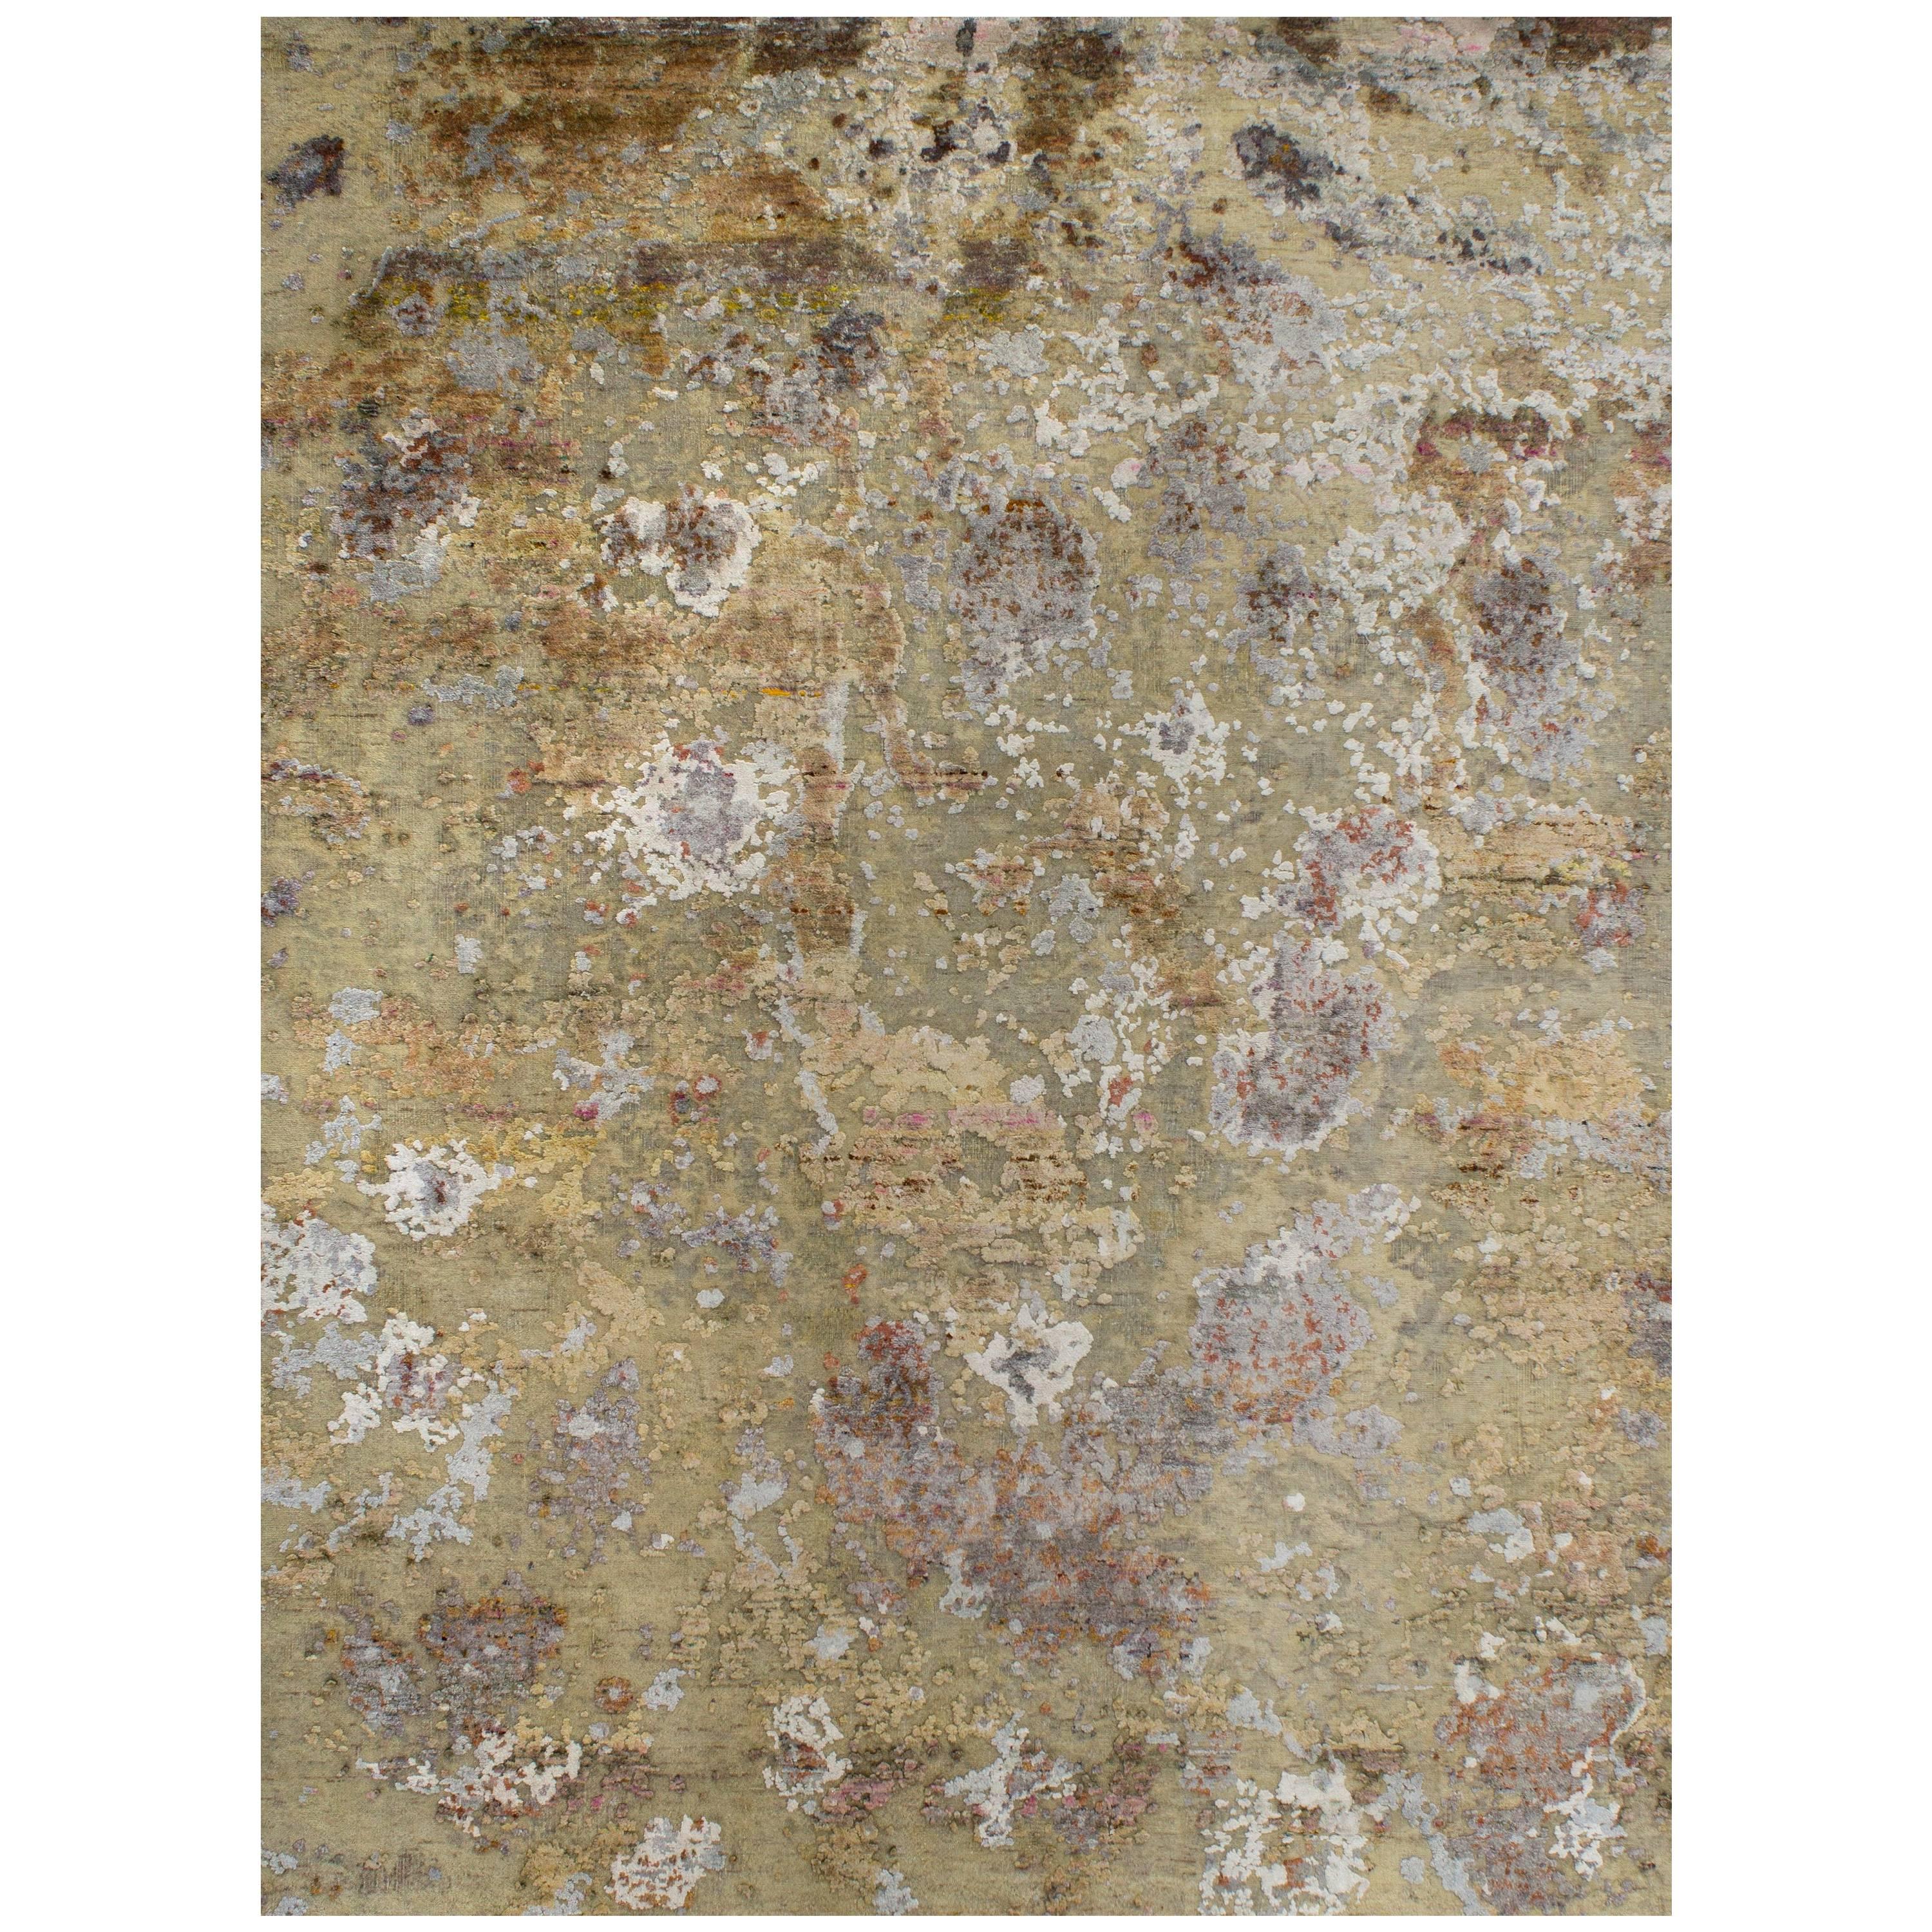 Gold Copper Rust Peach Beige Grey Hi-Low Hand-knotted Wool and Silk Rug in Stock For Sale